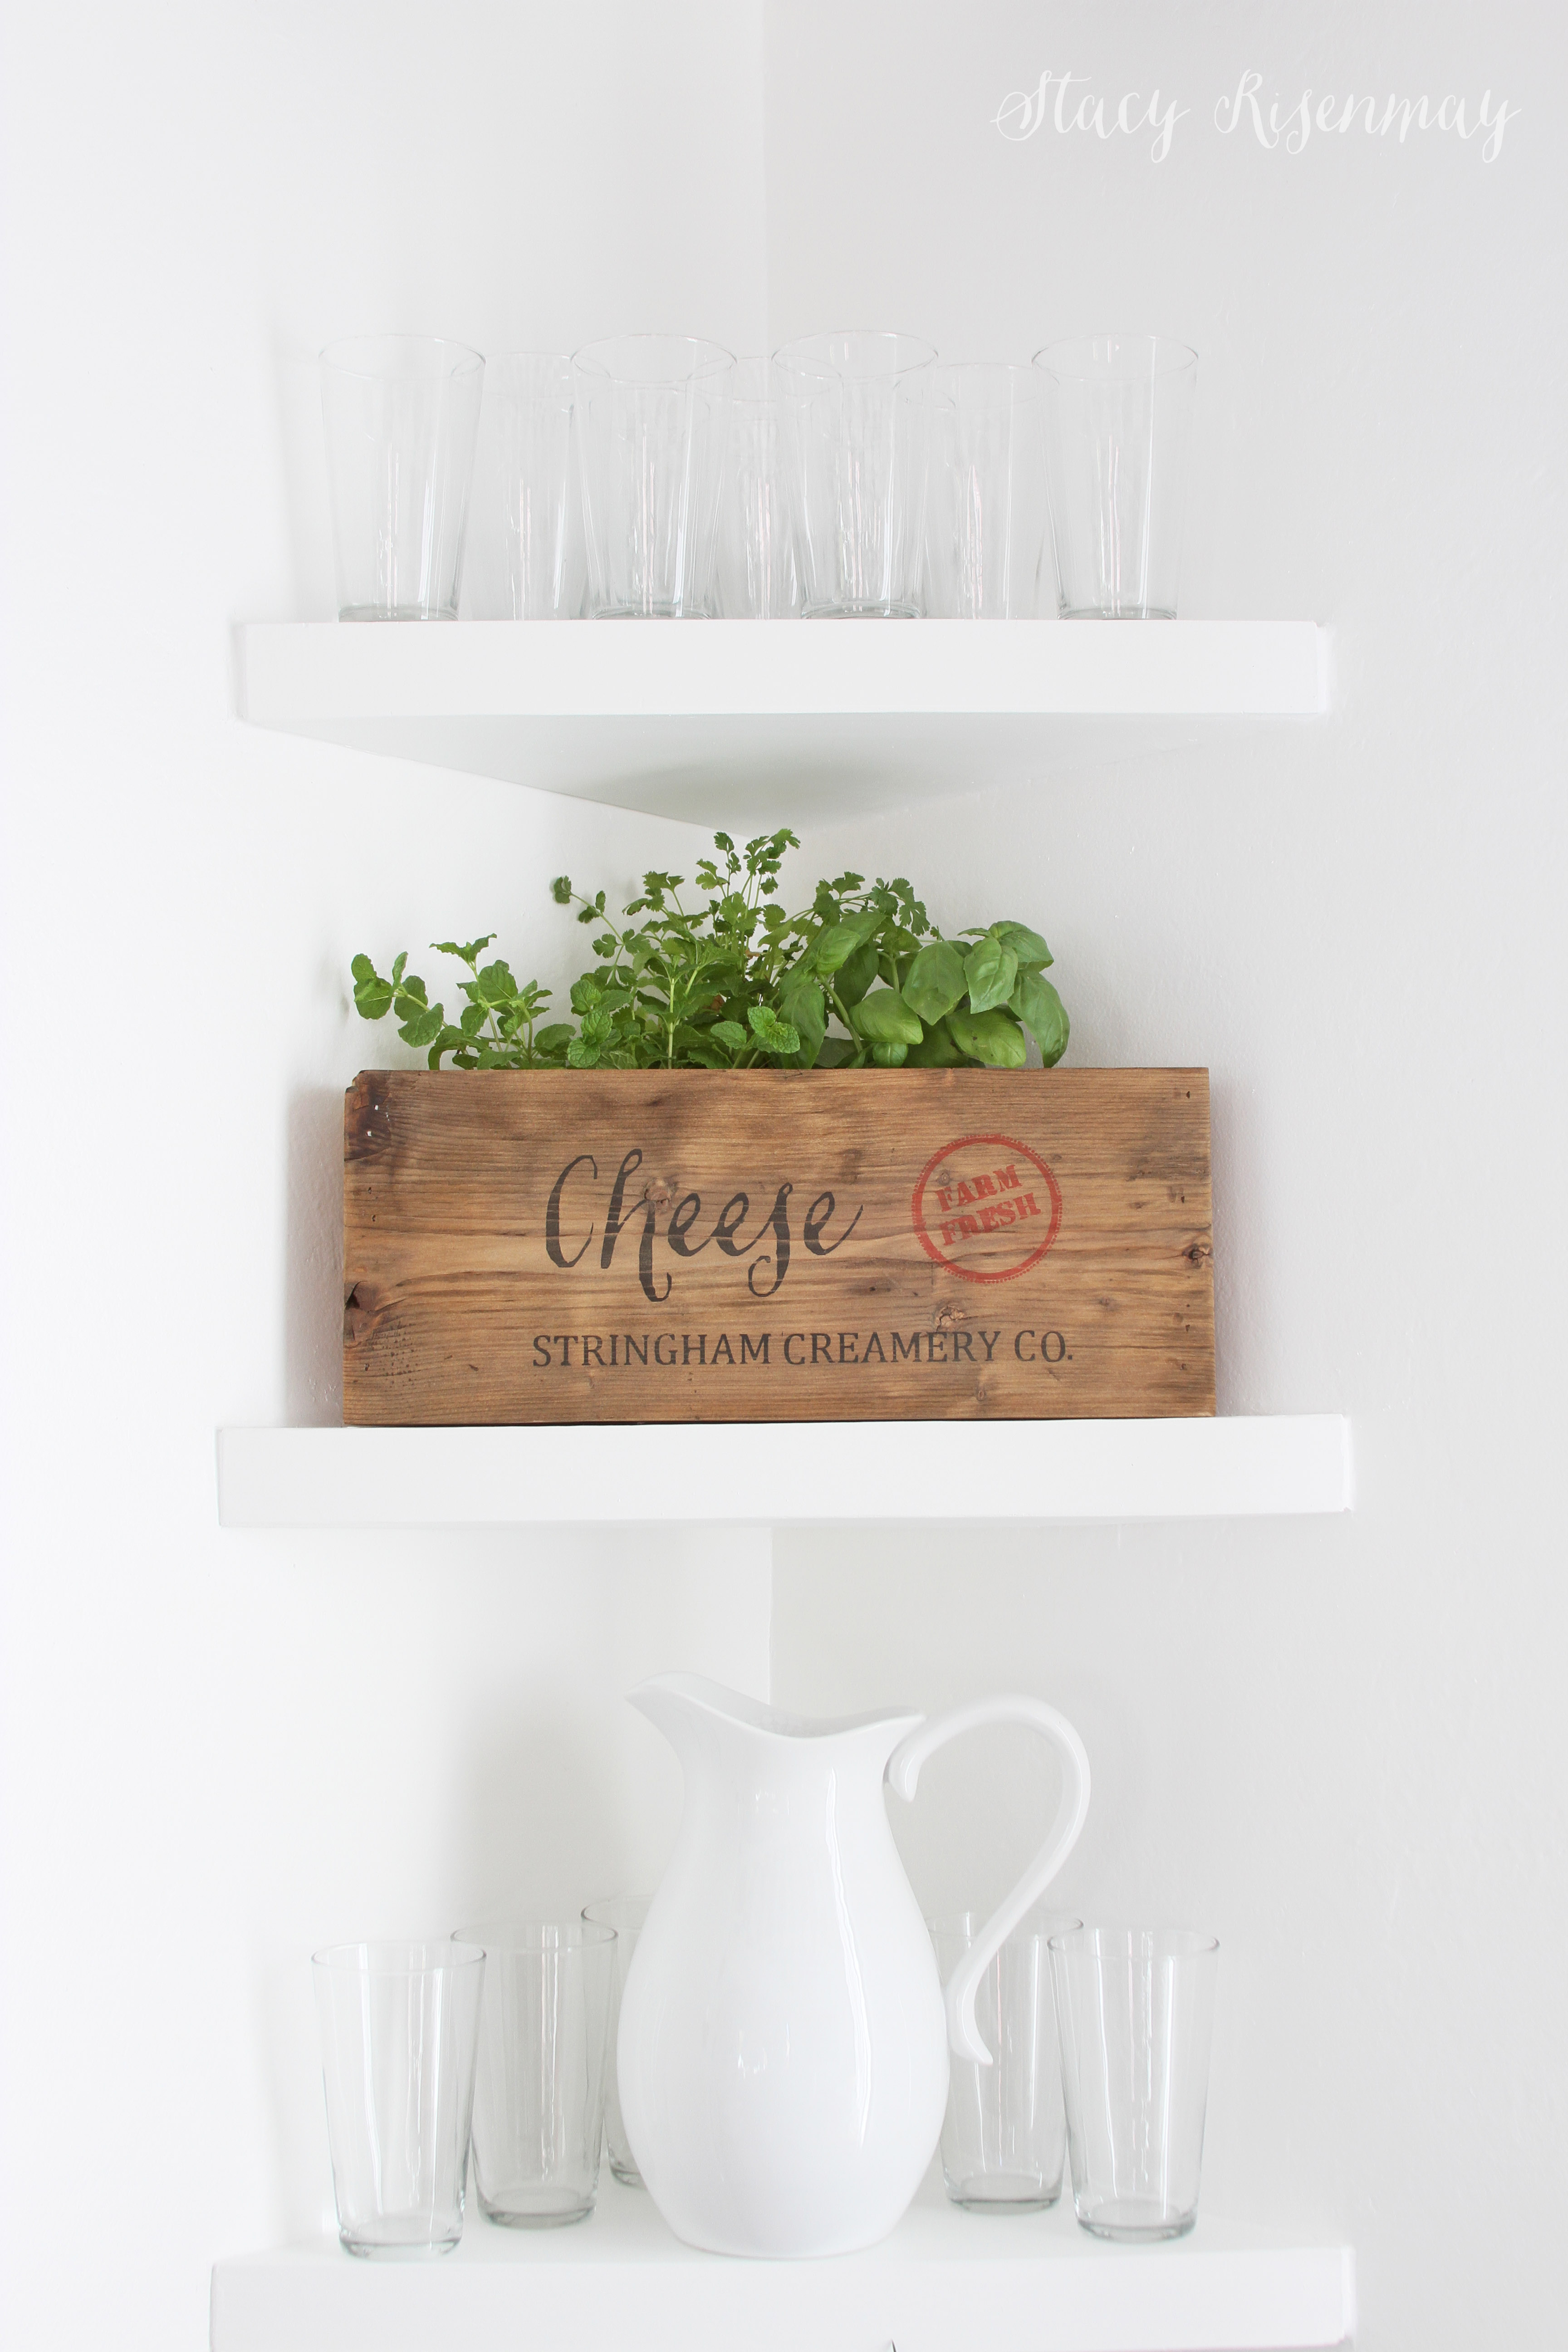 cheese crate as planter in kitchen for herbs